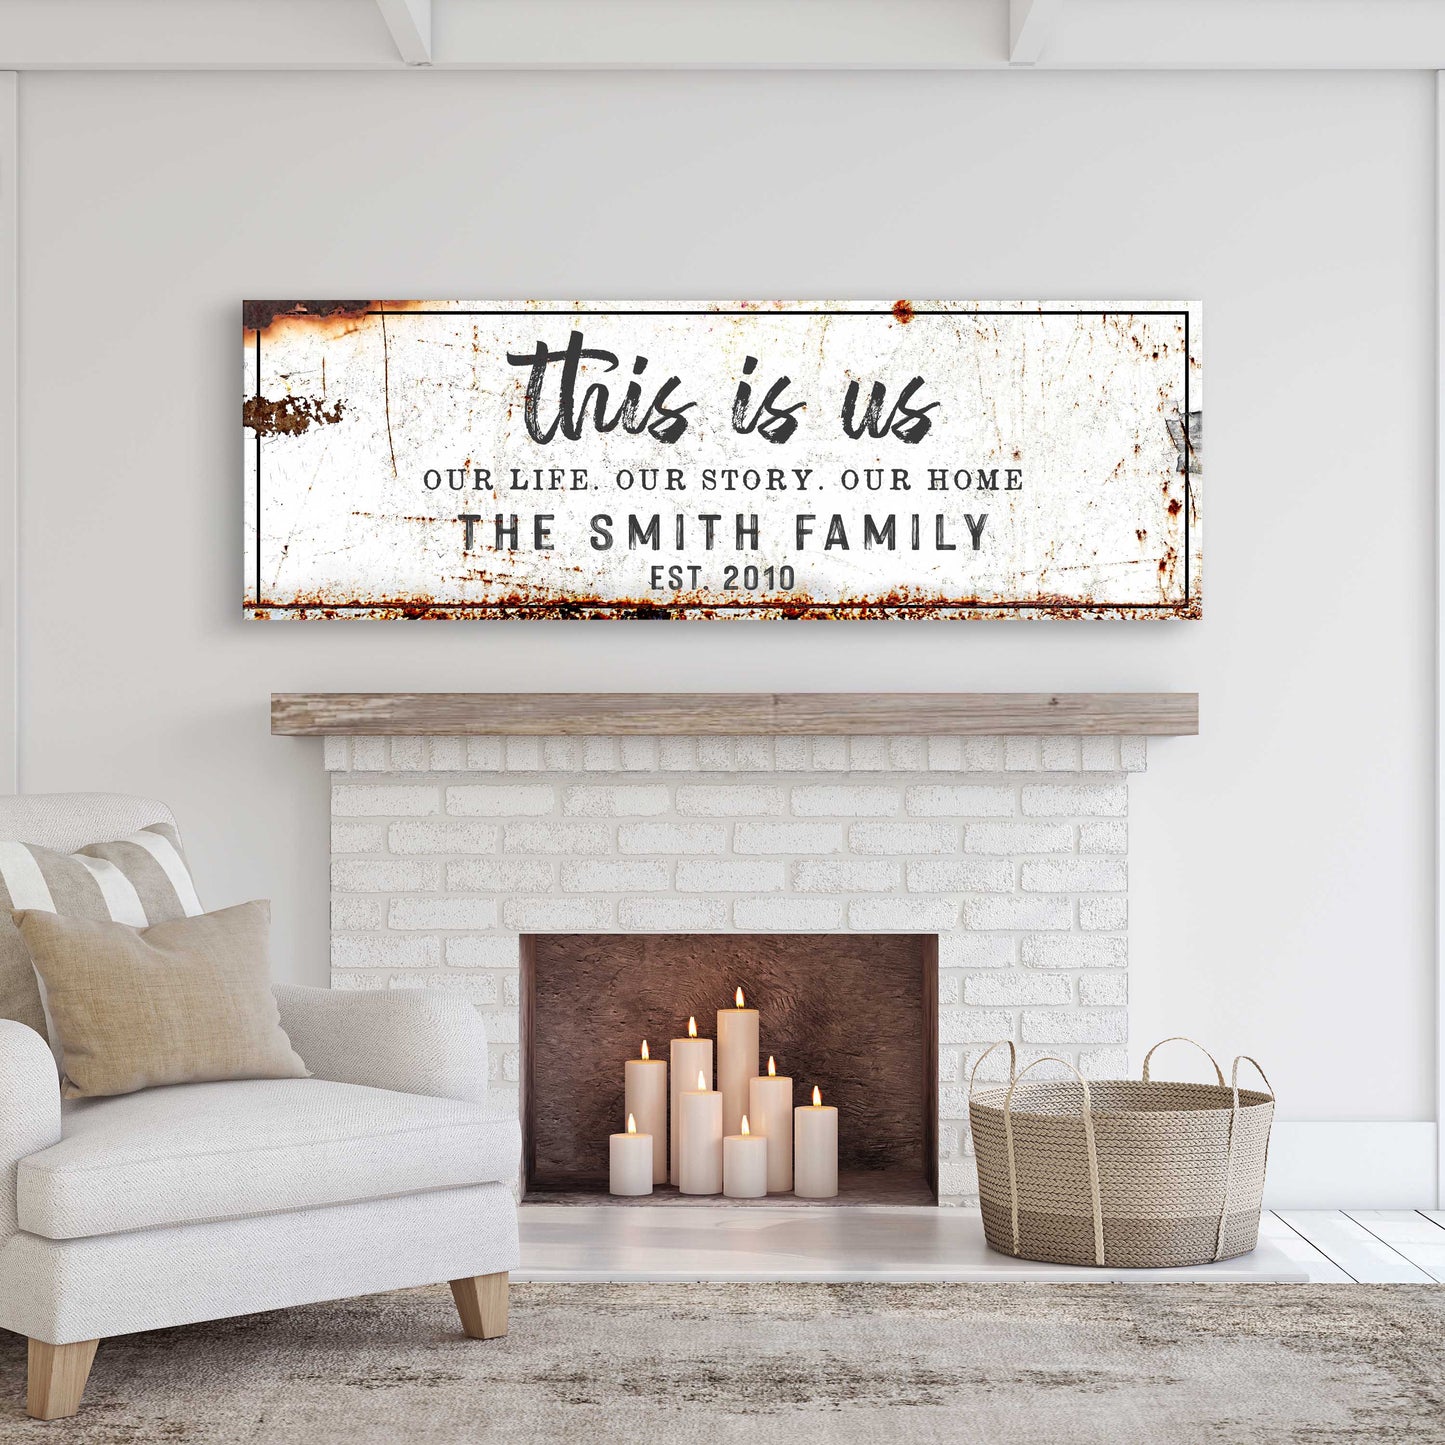 This is Us Rustic Sign - Image by Tailored Canvases